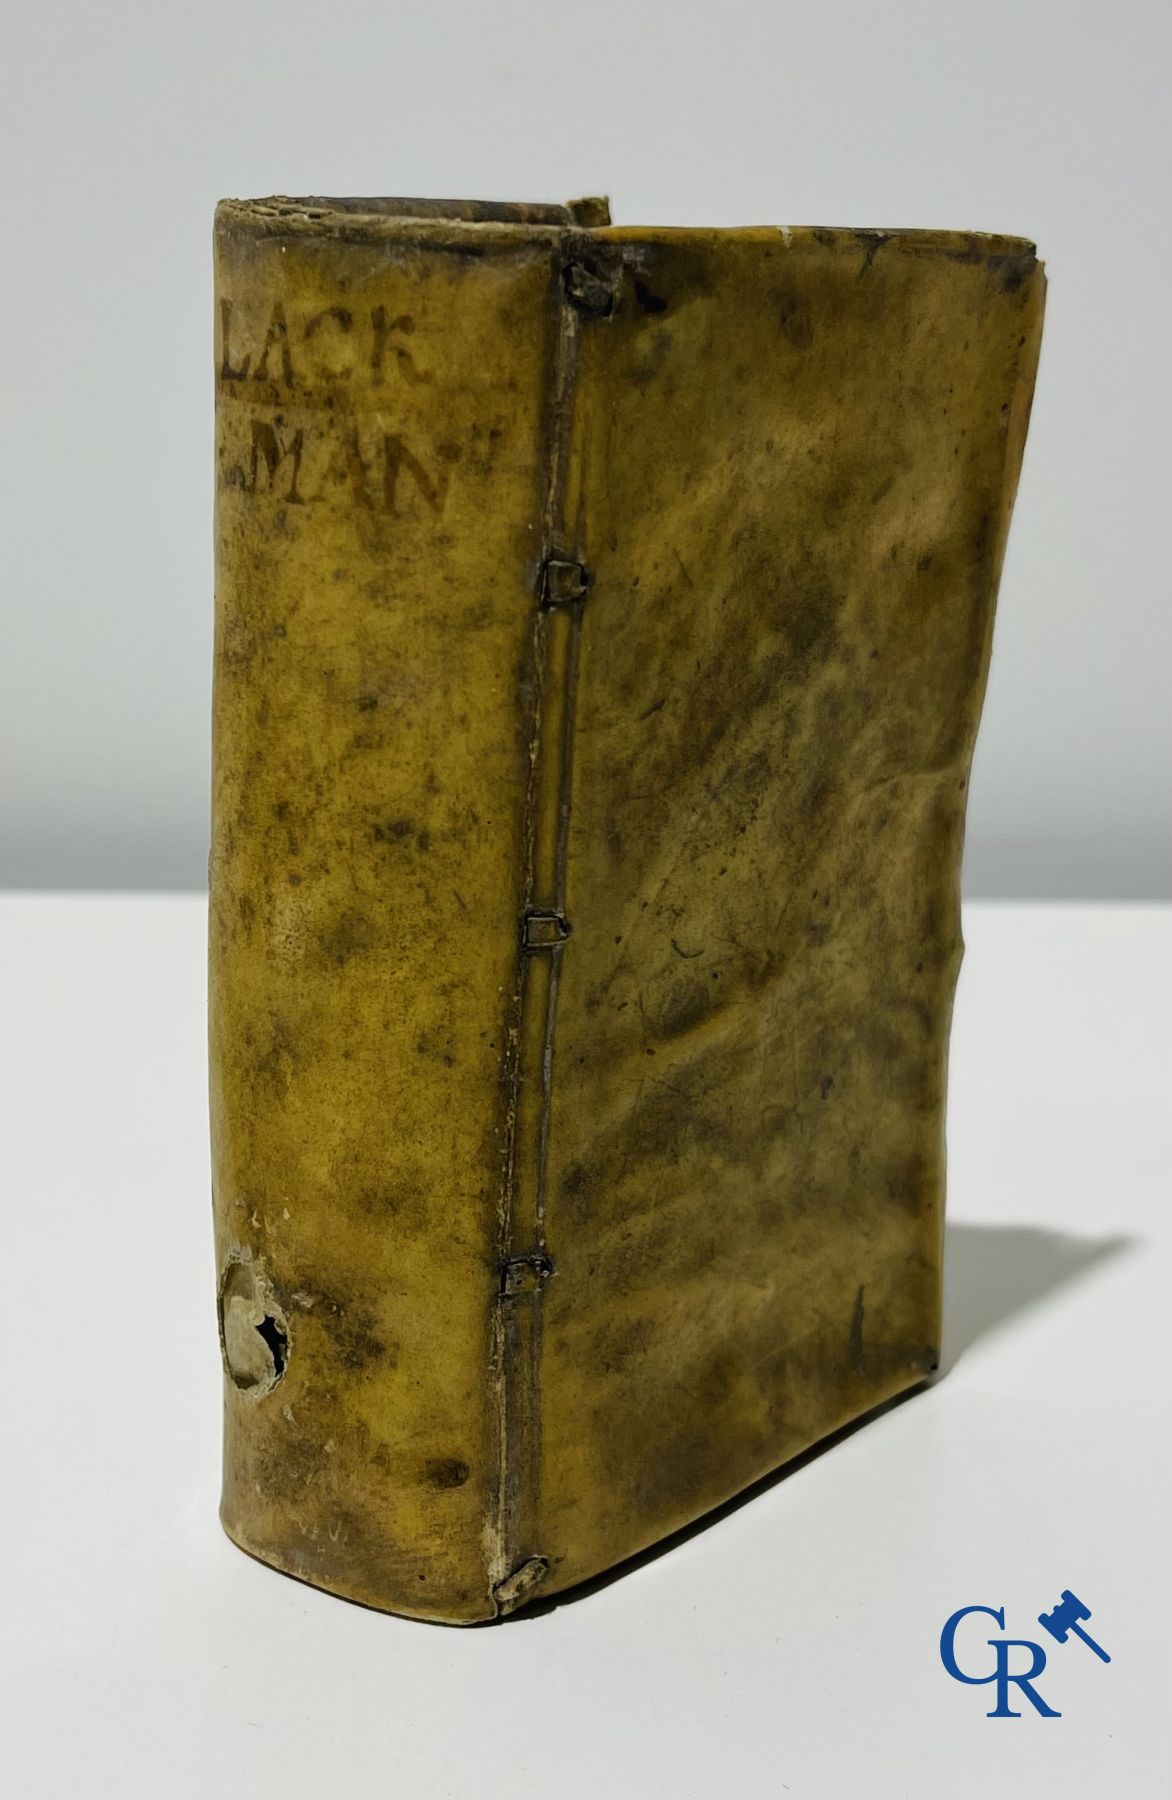 Early printed books: Interesting lot with various books and a score book. 17th-18th-19th century. - Image 28 of 38